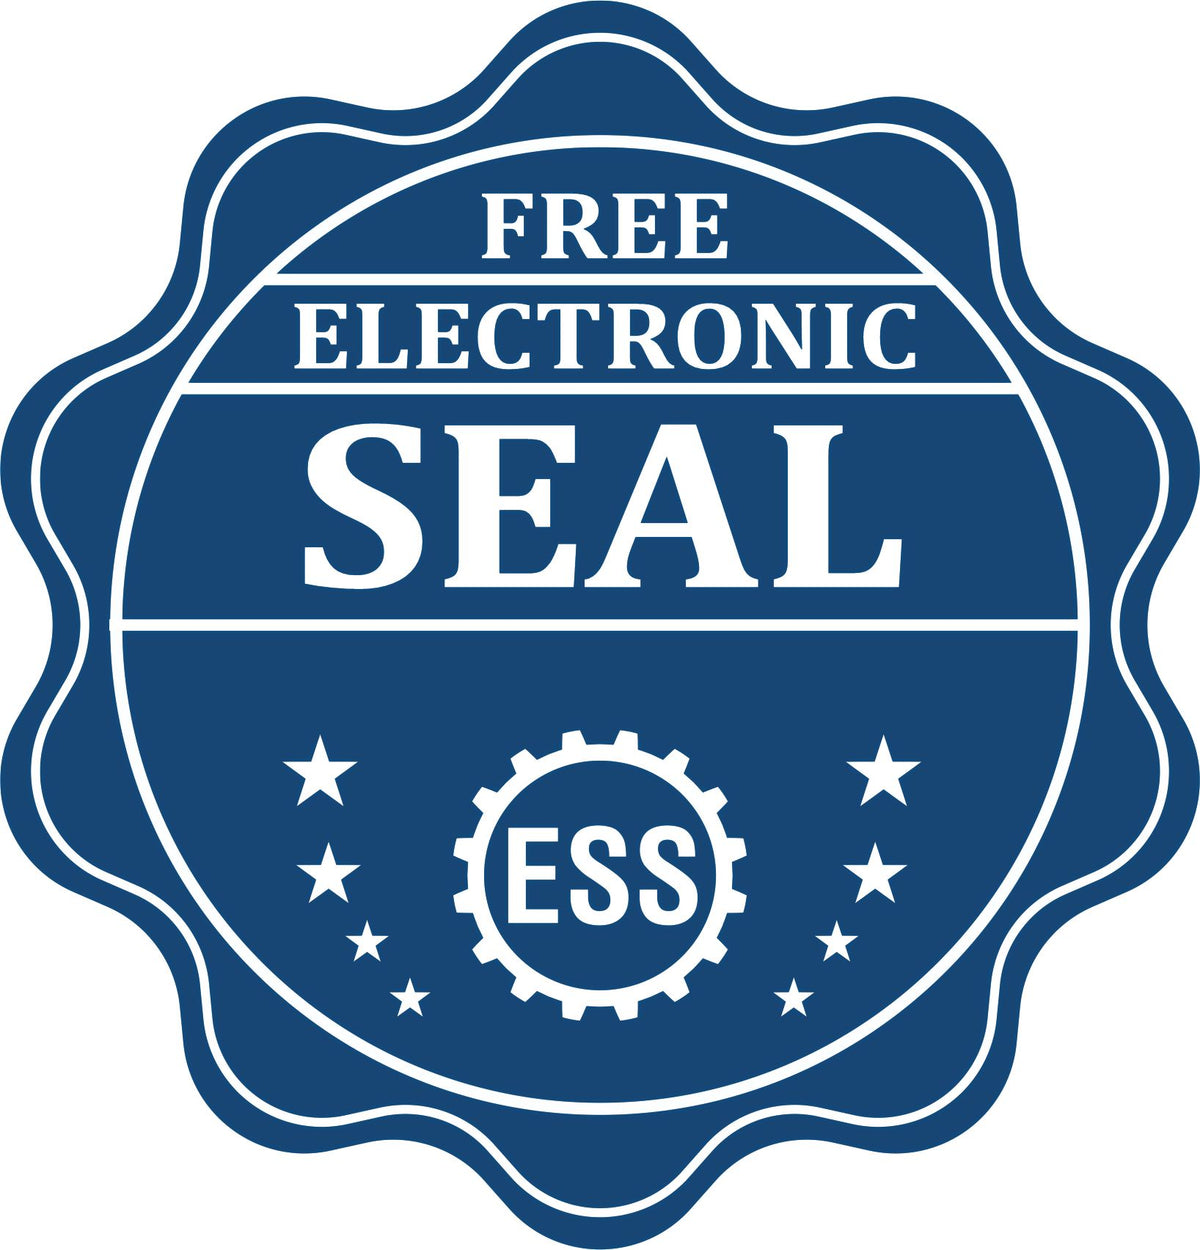 A badge showing a free electronic seal for the Heavy Duty Cast Iron West Virginia Geologist Seal Embosser with stars and the ESS gear on the emblem.